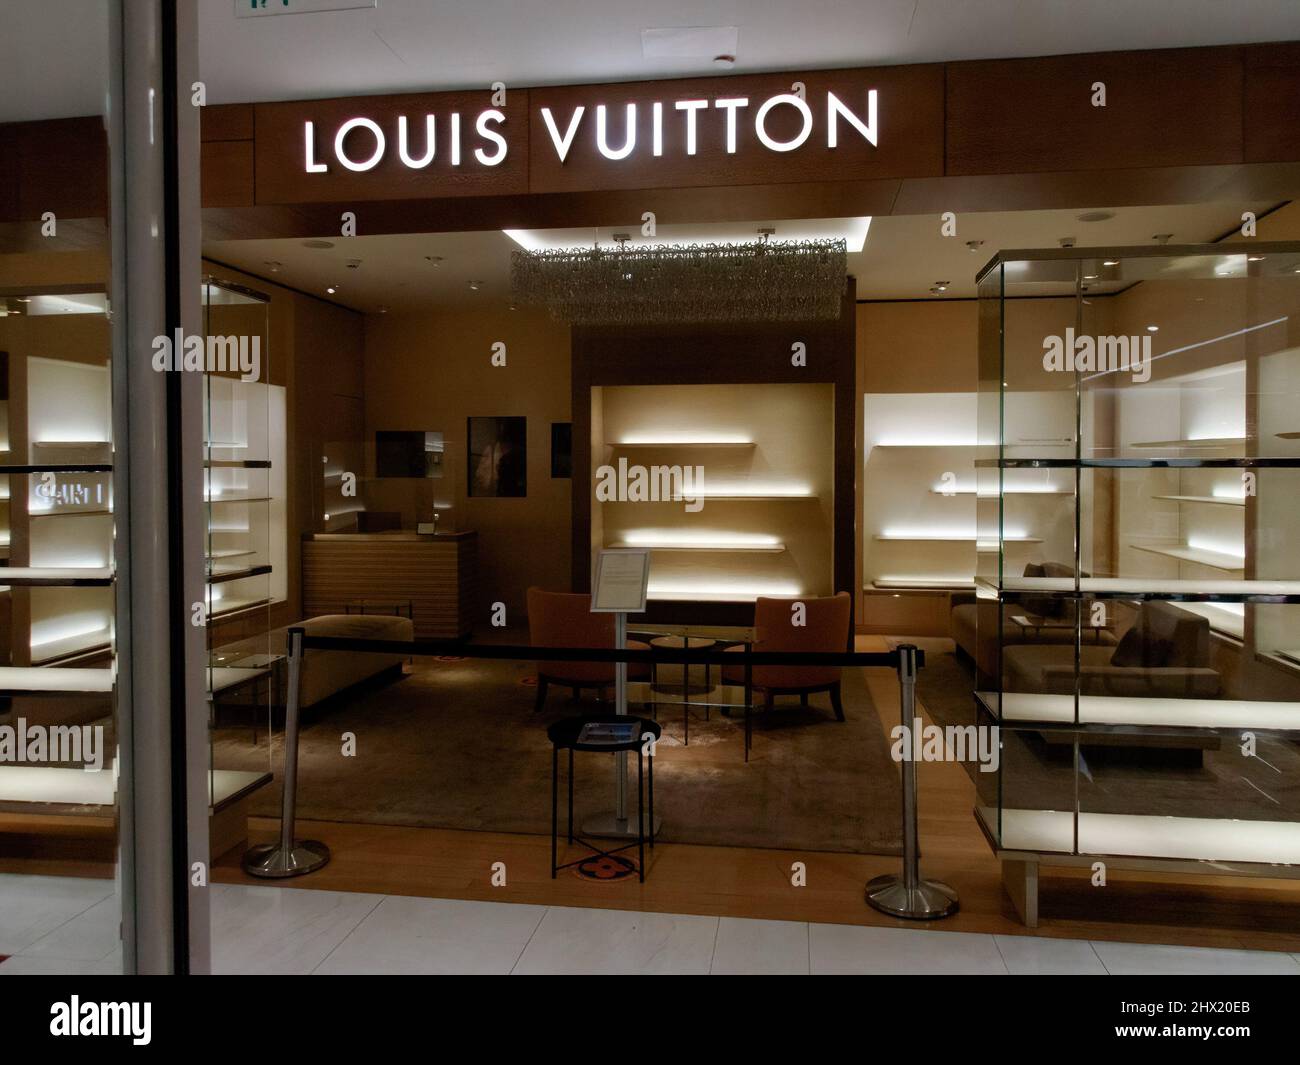 Louis Vuitton Moscow TSUM (TEMPORARY CLOSED) Store in Moscow, Russian  Federation